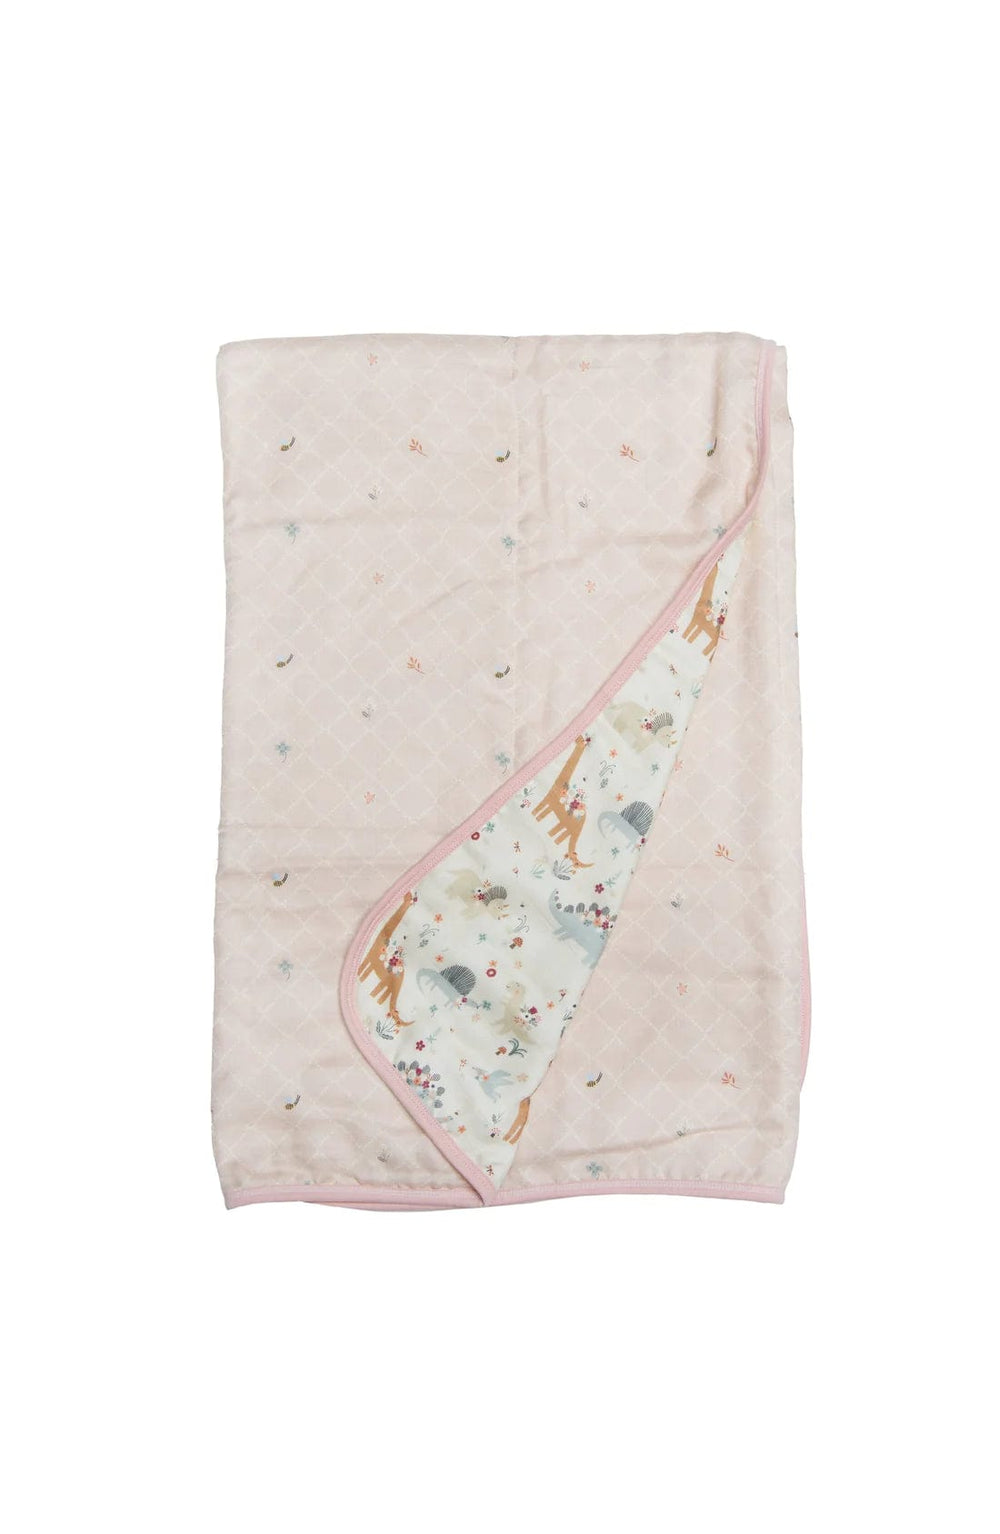 Muslin Quilt - Baby Dinomite LouLou Lollipop Lil Tulips